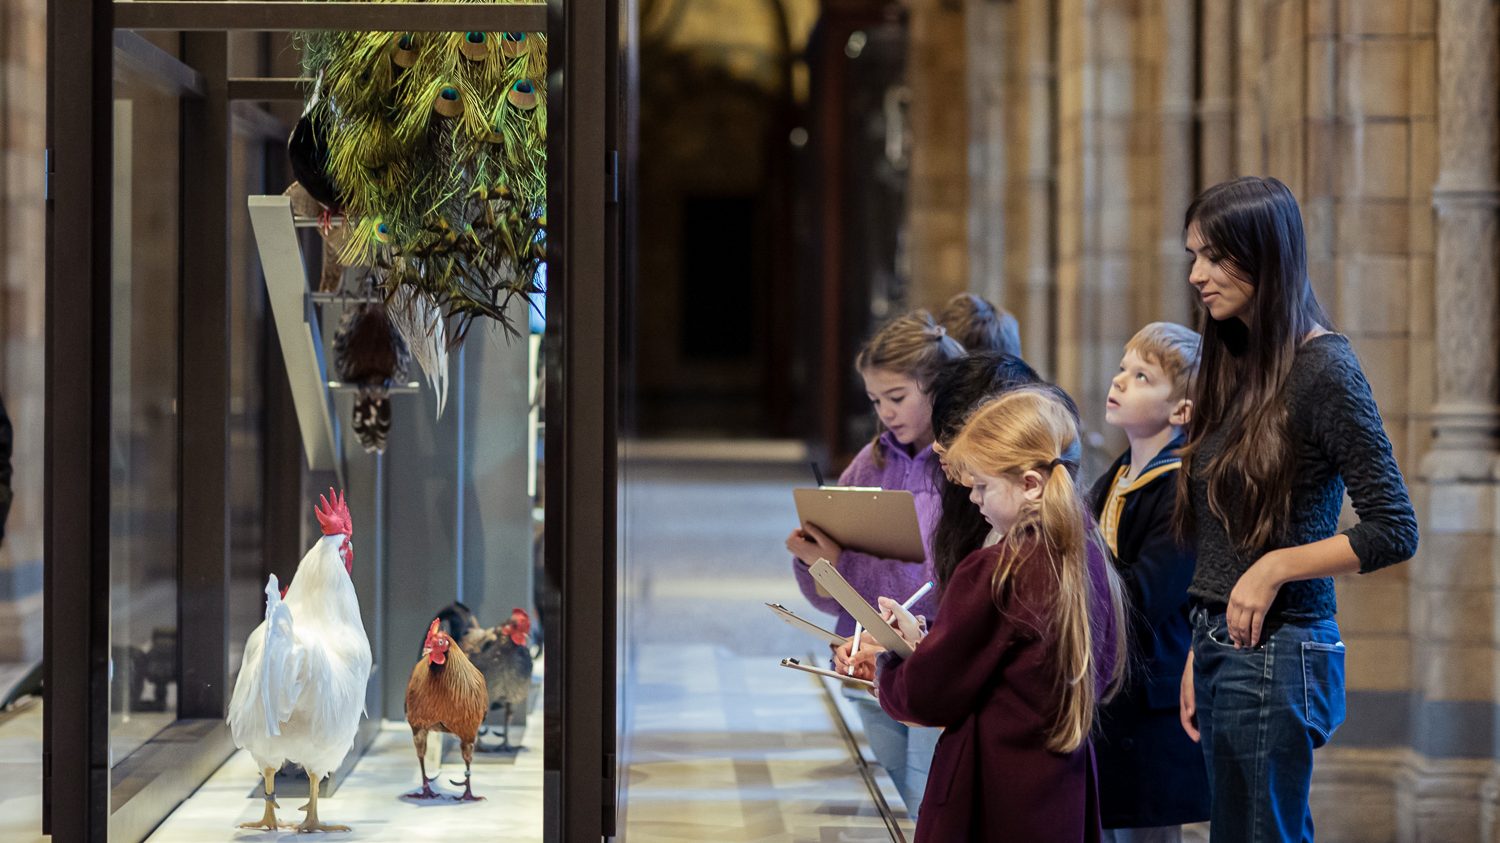 Ornithologist Mya Rose Craig joins children in a drawing activity for The Wild Escape at the Natural History Museum